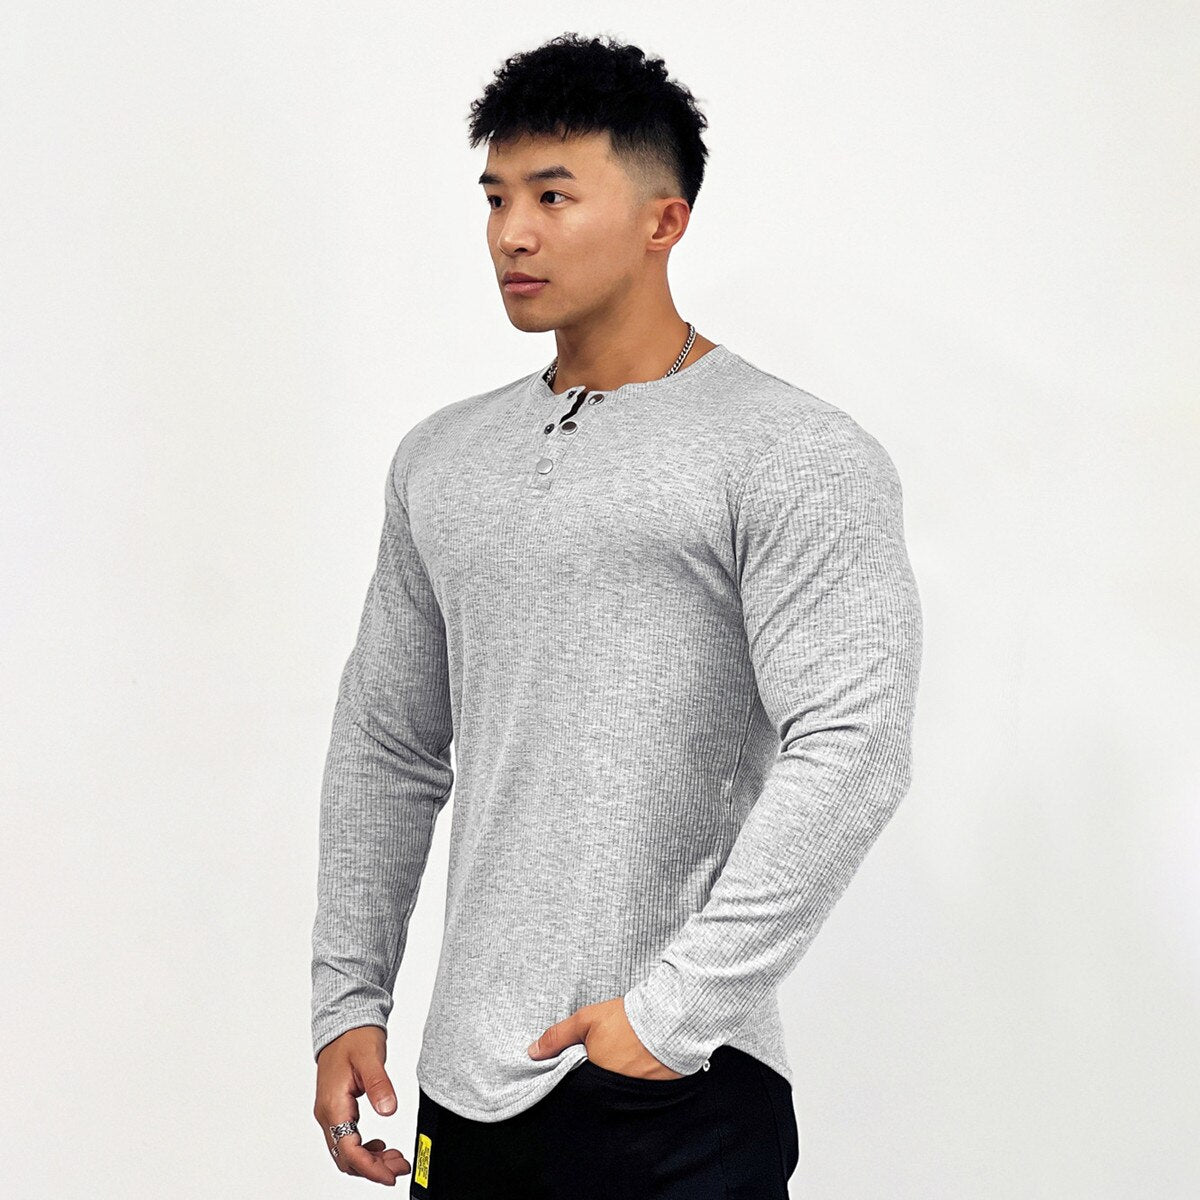 Solid Gym Fitness Long Sleeve T-shirt Men Casual Skinny Shirt Male Bodybuilding Tees Tops Spring Running Sport Training Clothing